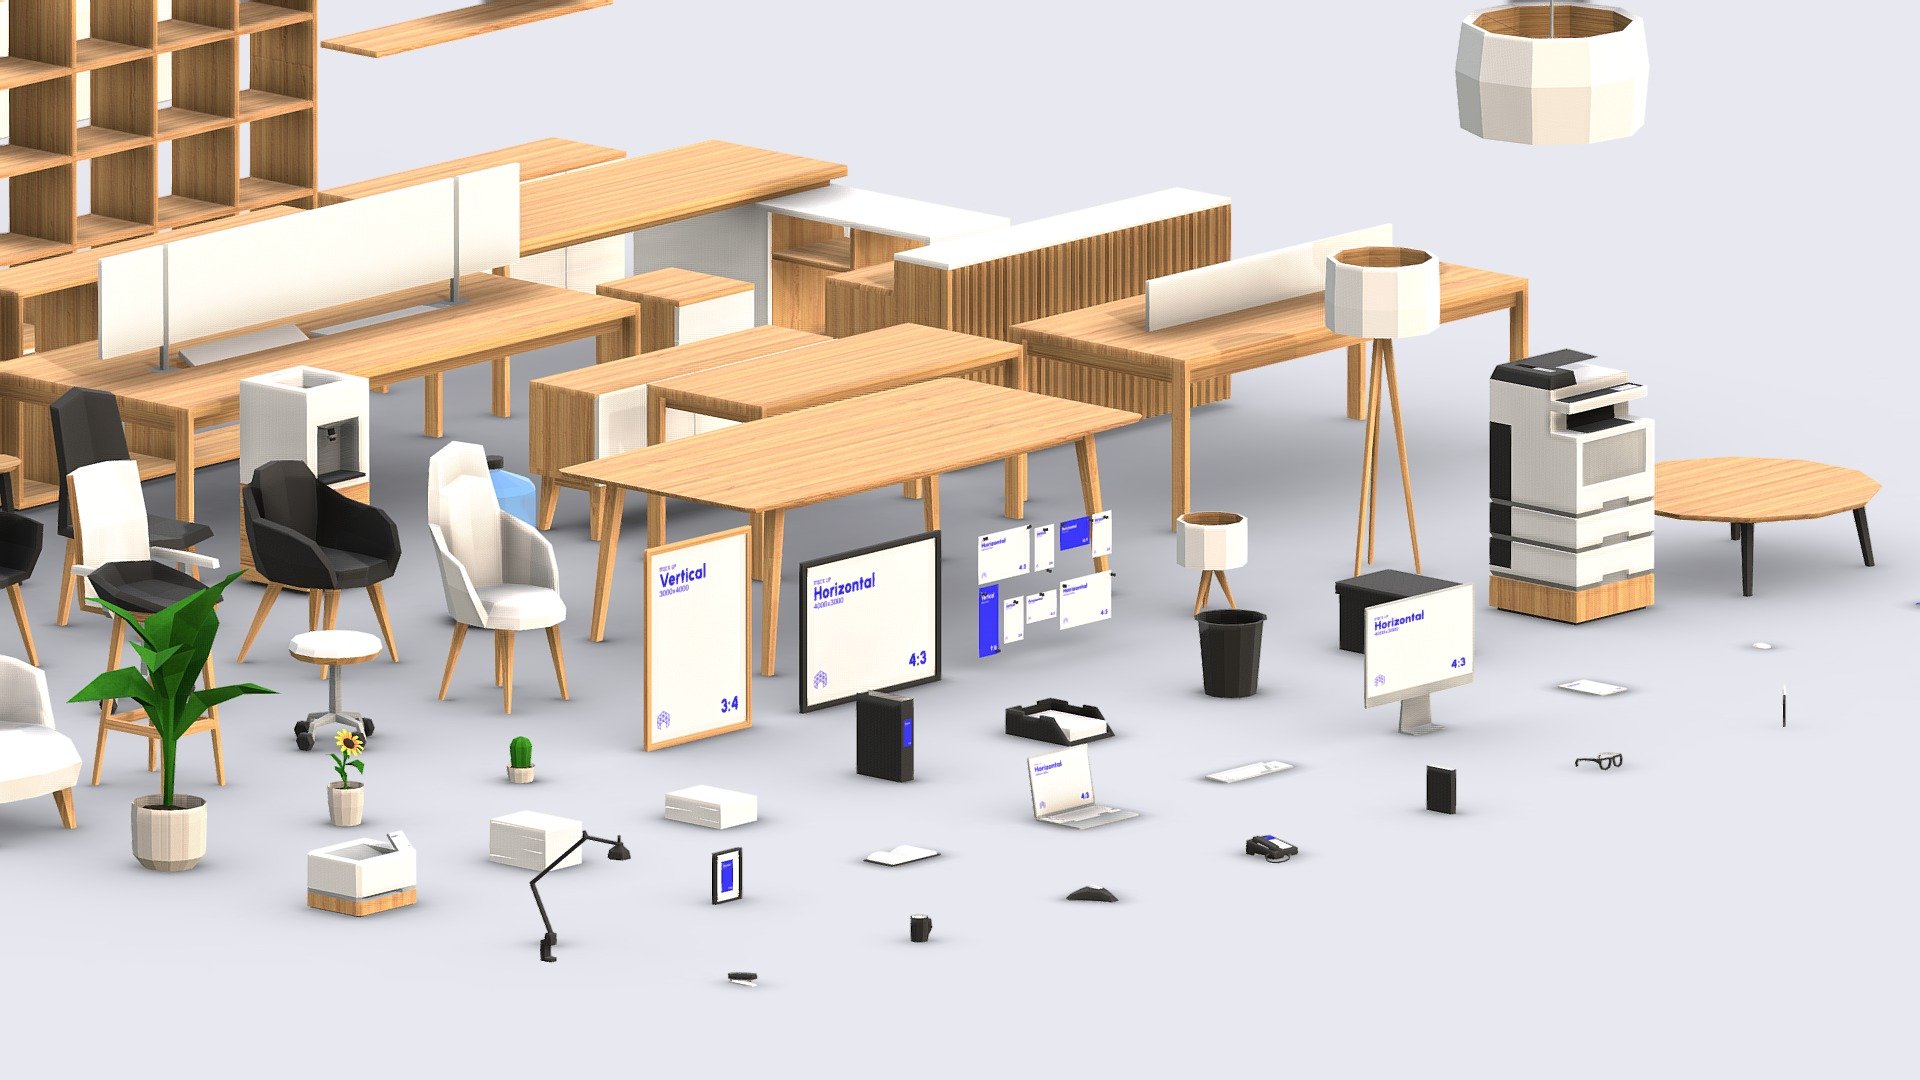 Low Poly Modern Minimal Office Furniture
9,537 Vertices / 8,666 Faces each / 73 Objects

Elevate your virtual office and architectural visualization projects with our Premium 3D Office Furniture Pack. This meticulously crafted collection of high-quality 3D objects is designed to meet the diverse needs of architects, game developers, and architectural visualization professionals. From executive offices to bustling workspaces, this pack has everything you need to create stunning, true-to-life office scenes.

Includes the next files in OBJ, FBX, GLB and BLEND (Native):




4 Screens/Boards

13 Cabinests/Shelves

9 Desks/Tables

10 Chairs/Sofas

4 Lamps

6 Gadgets

13 Desk Supplies

3 Plants

2 Frames

2 Printers

7 Extras
 - Modern Minimal Office Furniture Pack - Buy Royalty Free 3D model by Studio Ochi (@studioochi) 3d model